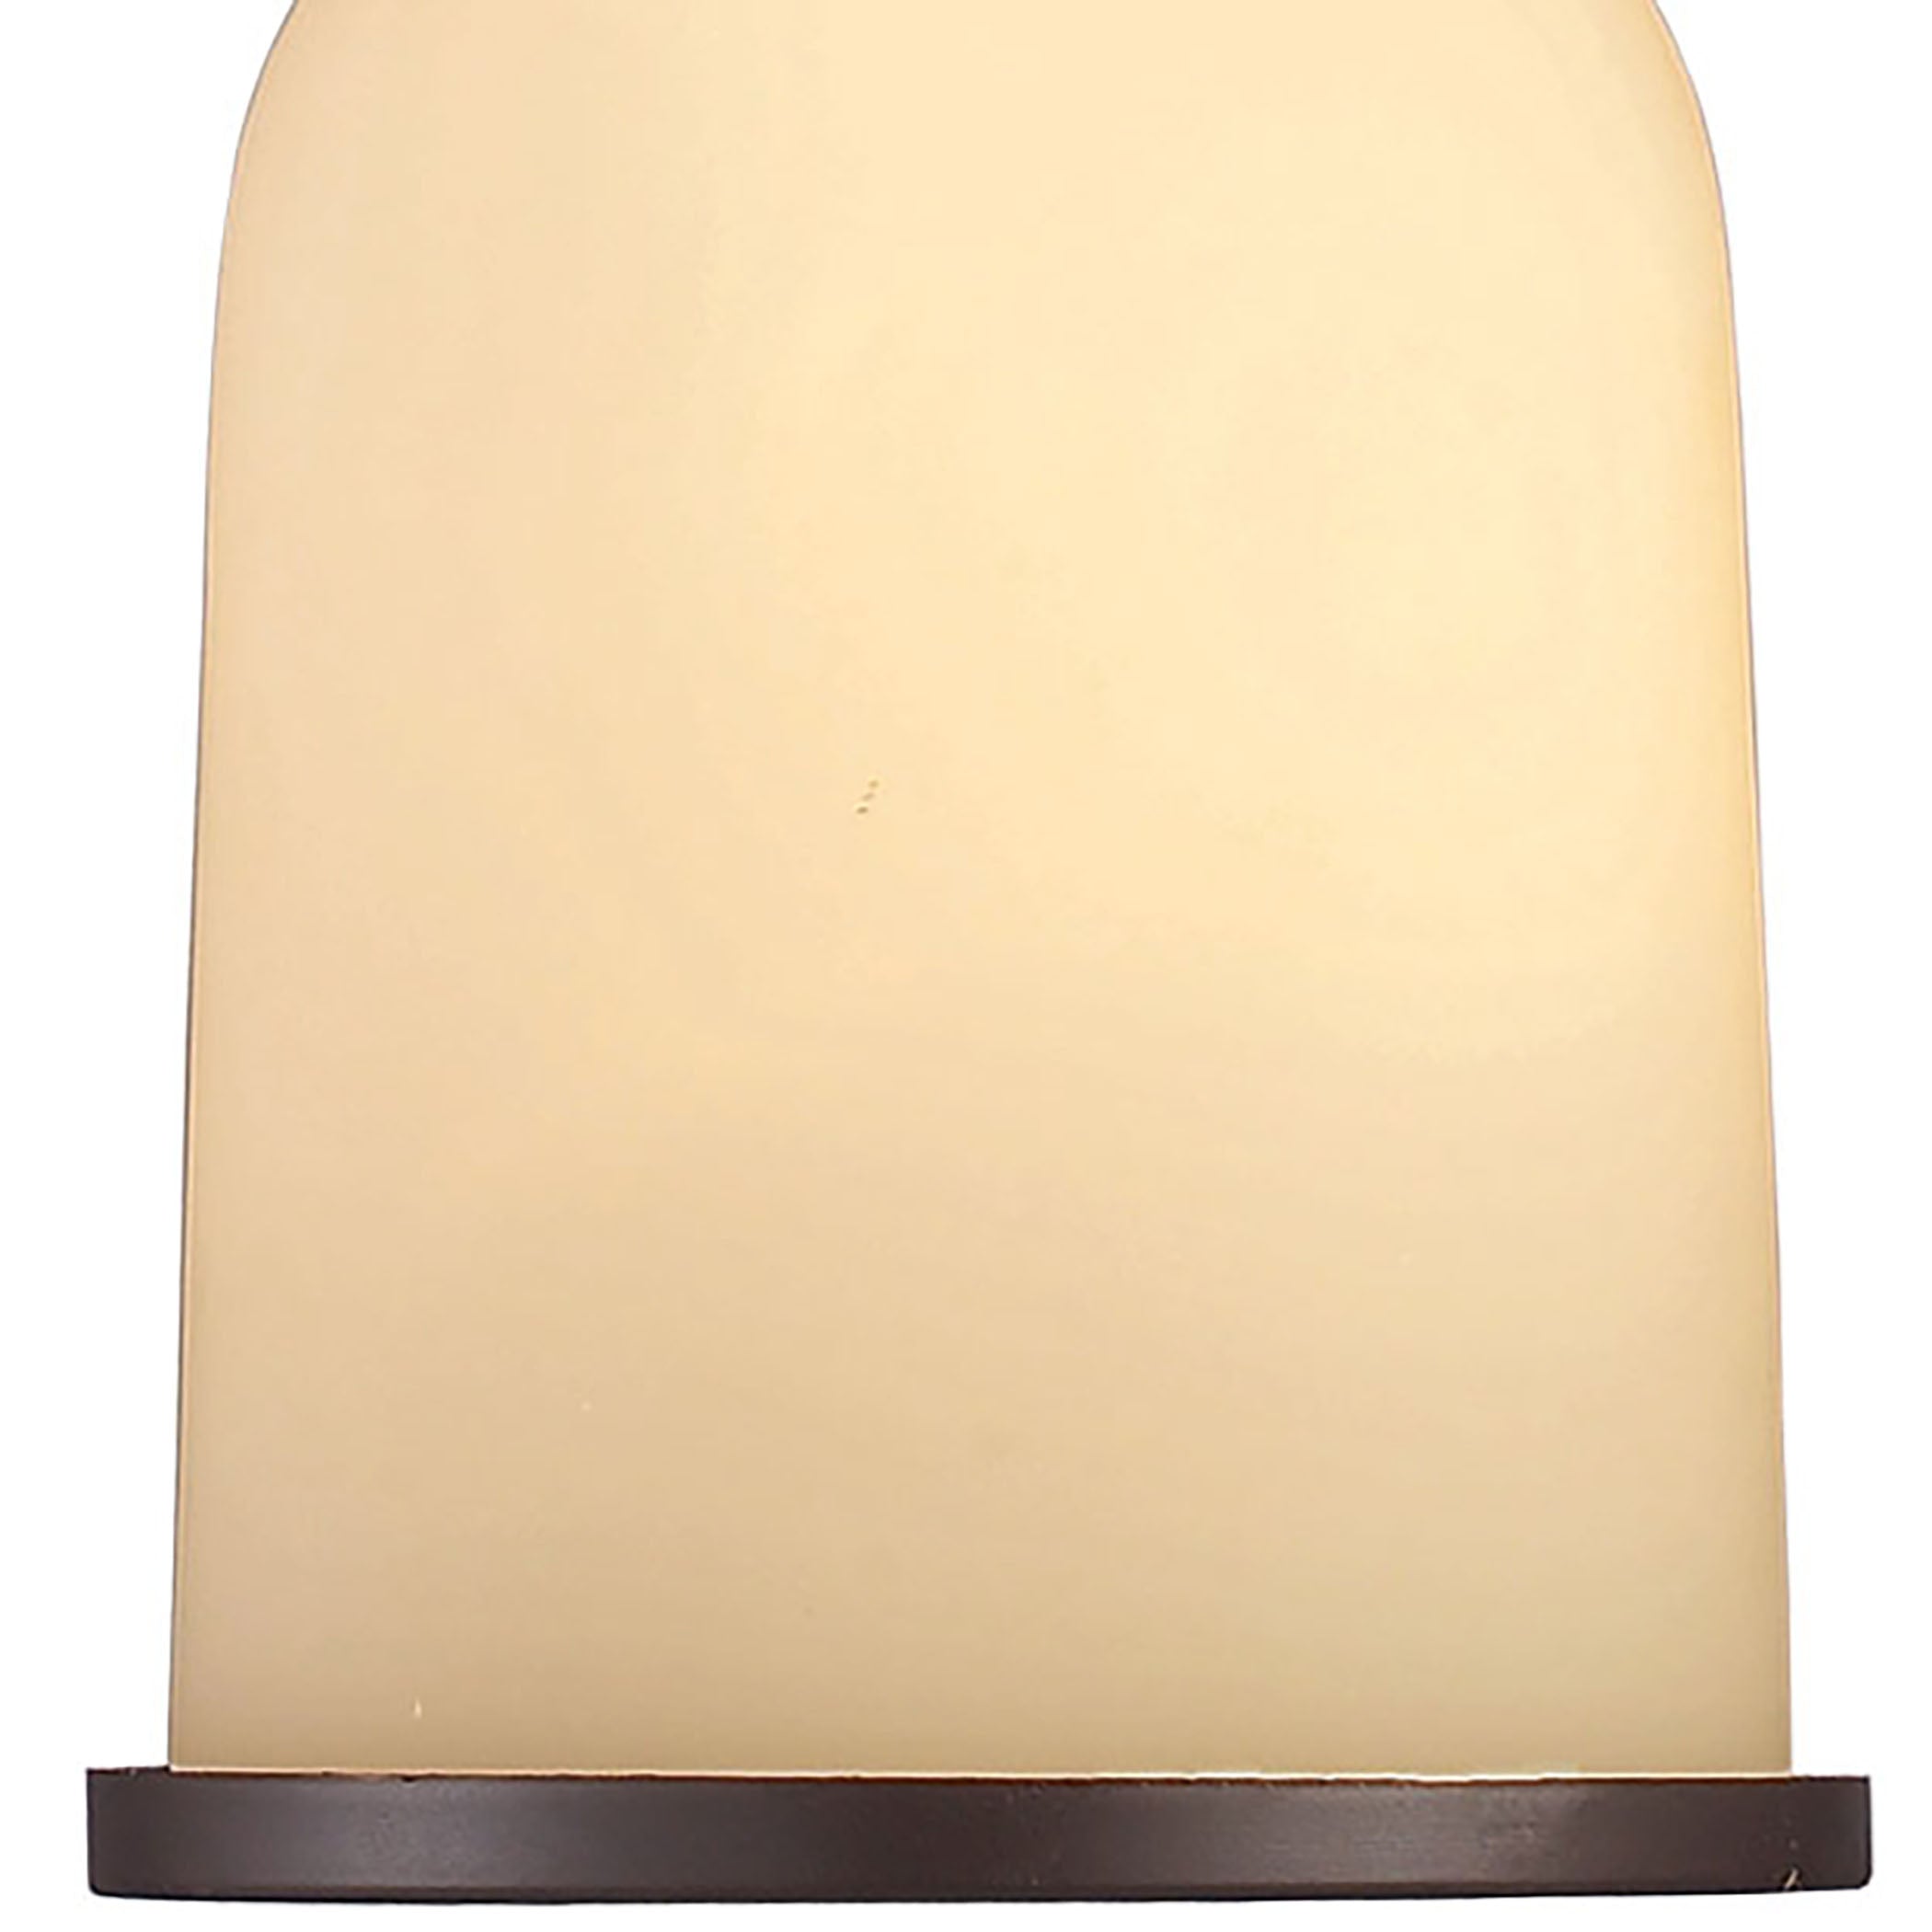 ELK Lighting 66132-1 Chadwick 1-Light Mini Pendant in Oiled Bronze with Off-white Glass